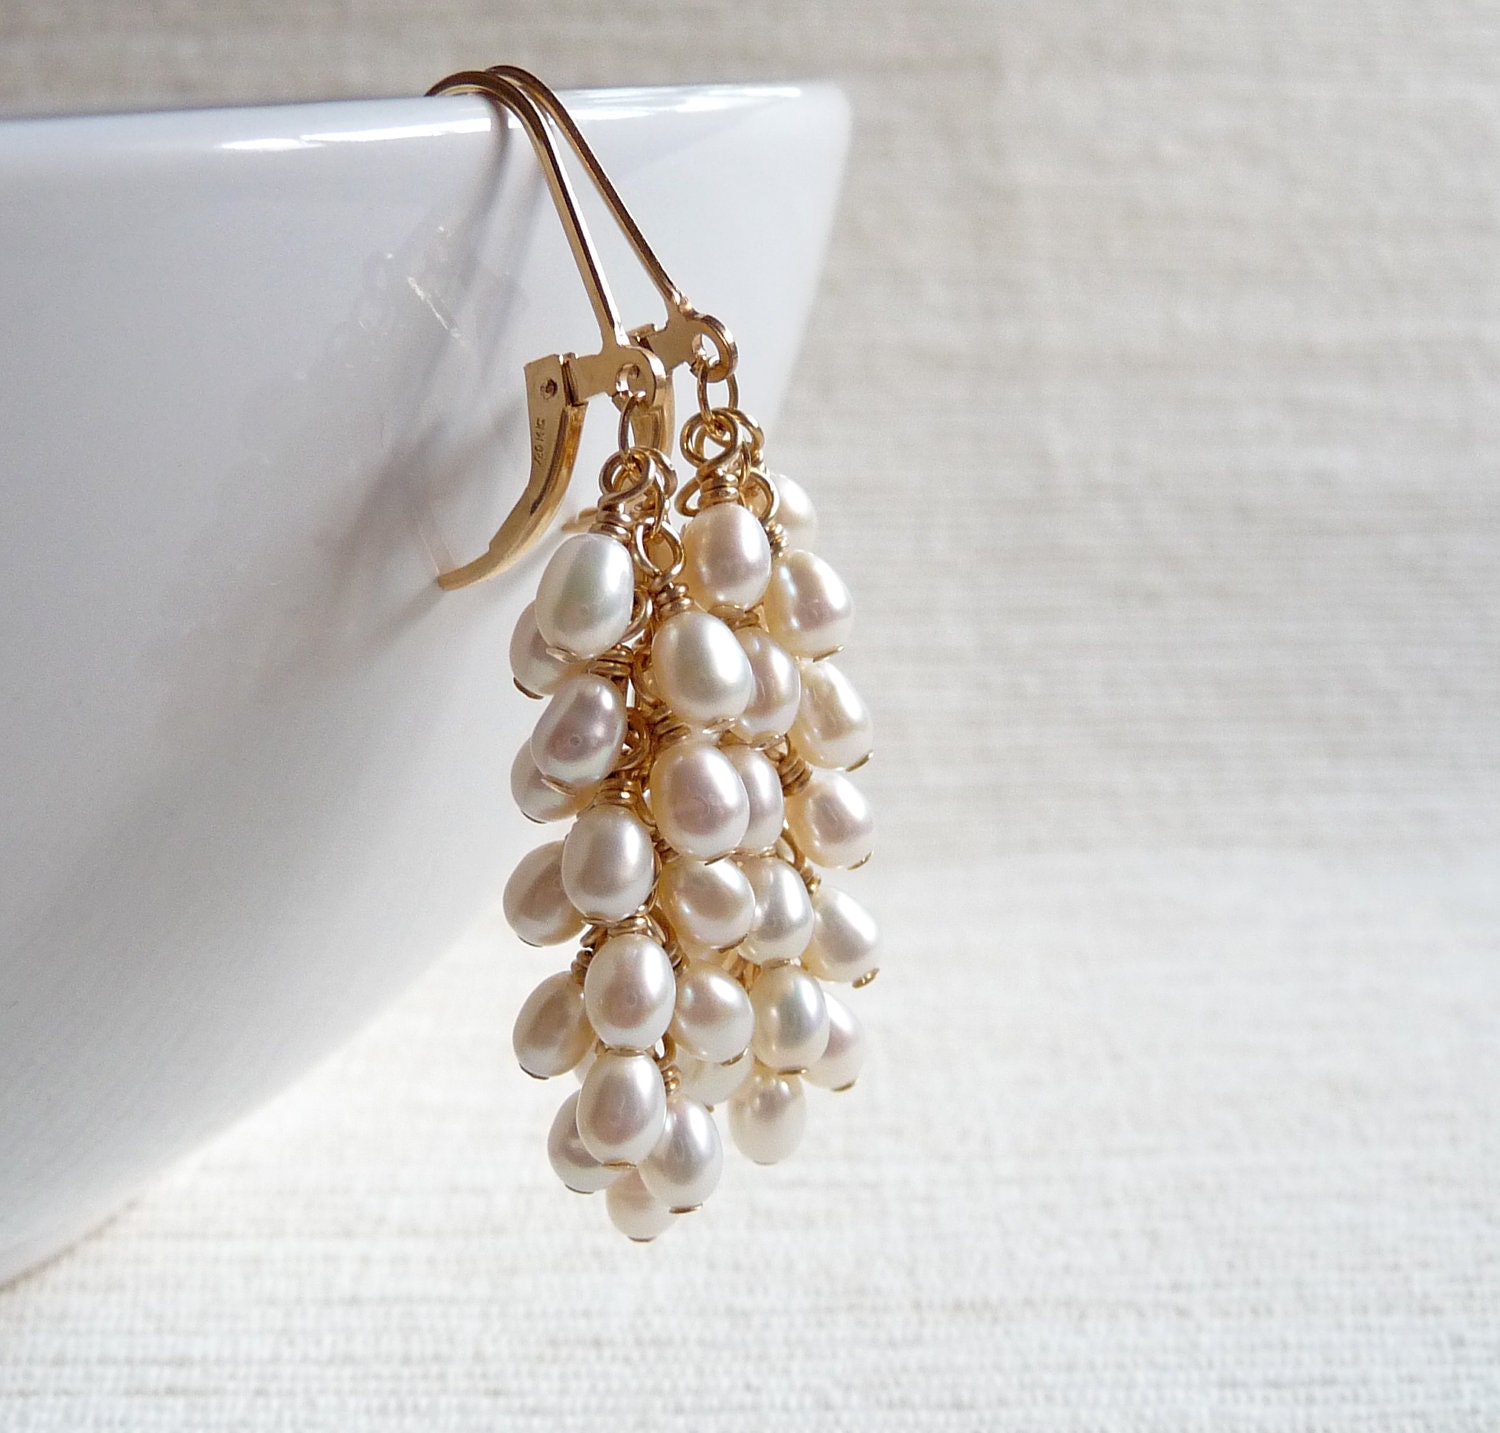 ON VACATION/MOVING - Pearl Clusters - Fresh Water Pearls and 14k Gold Filled Cluster Earrings